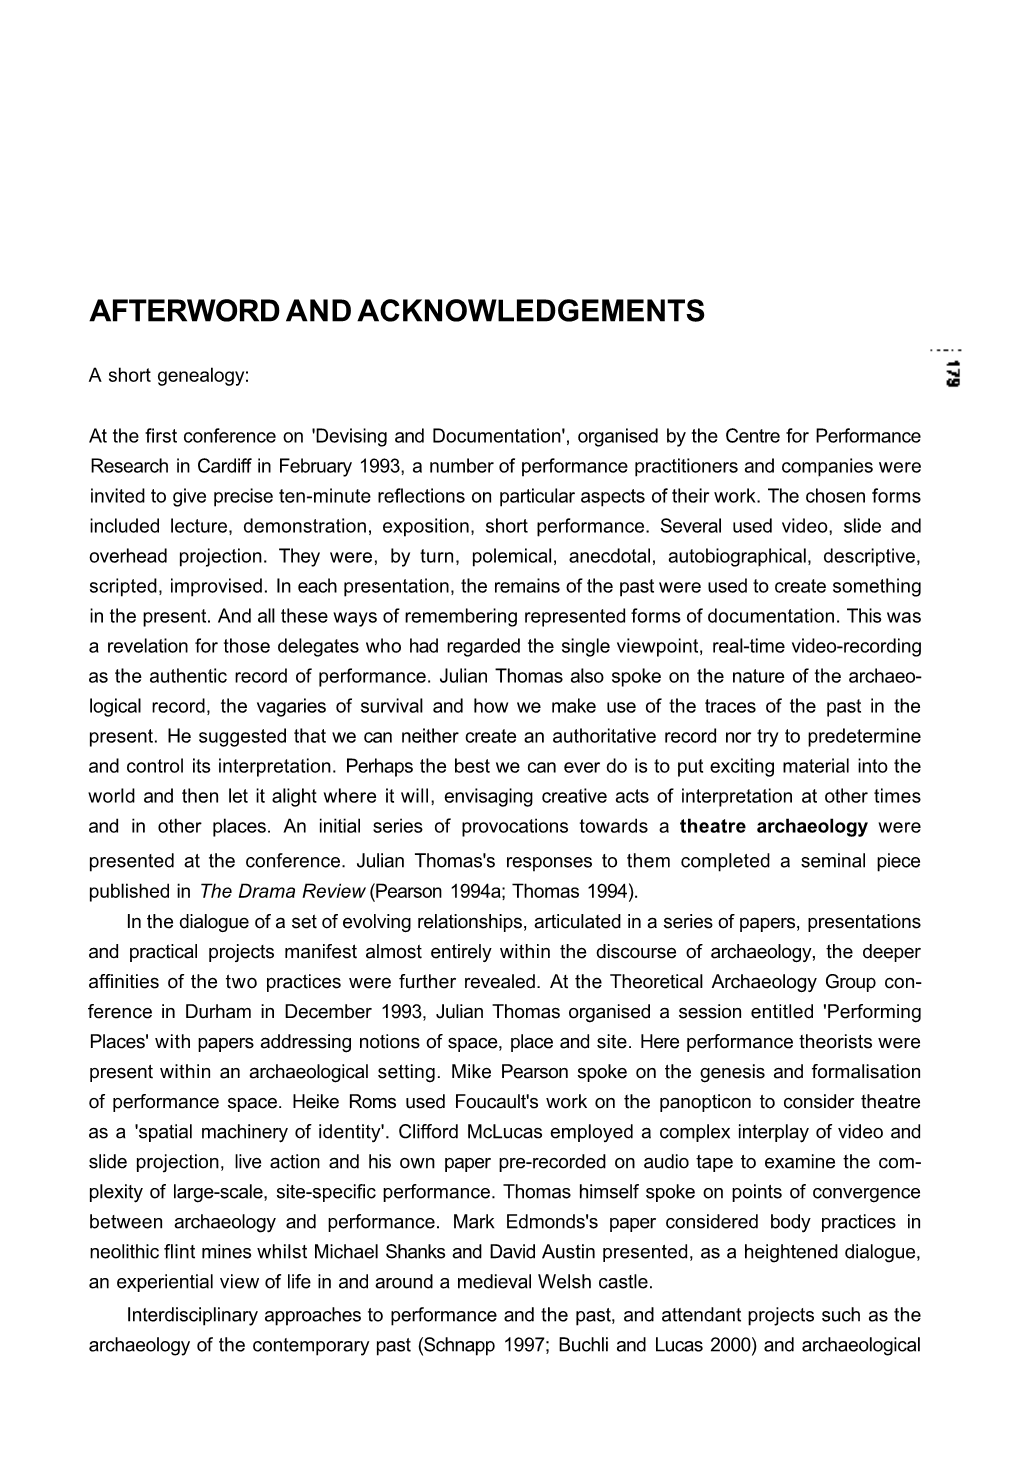 Afterword and Acknowledgements